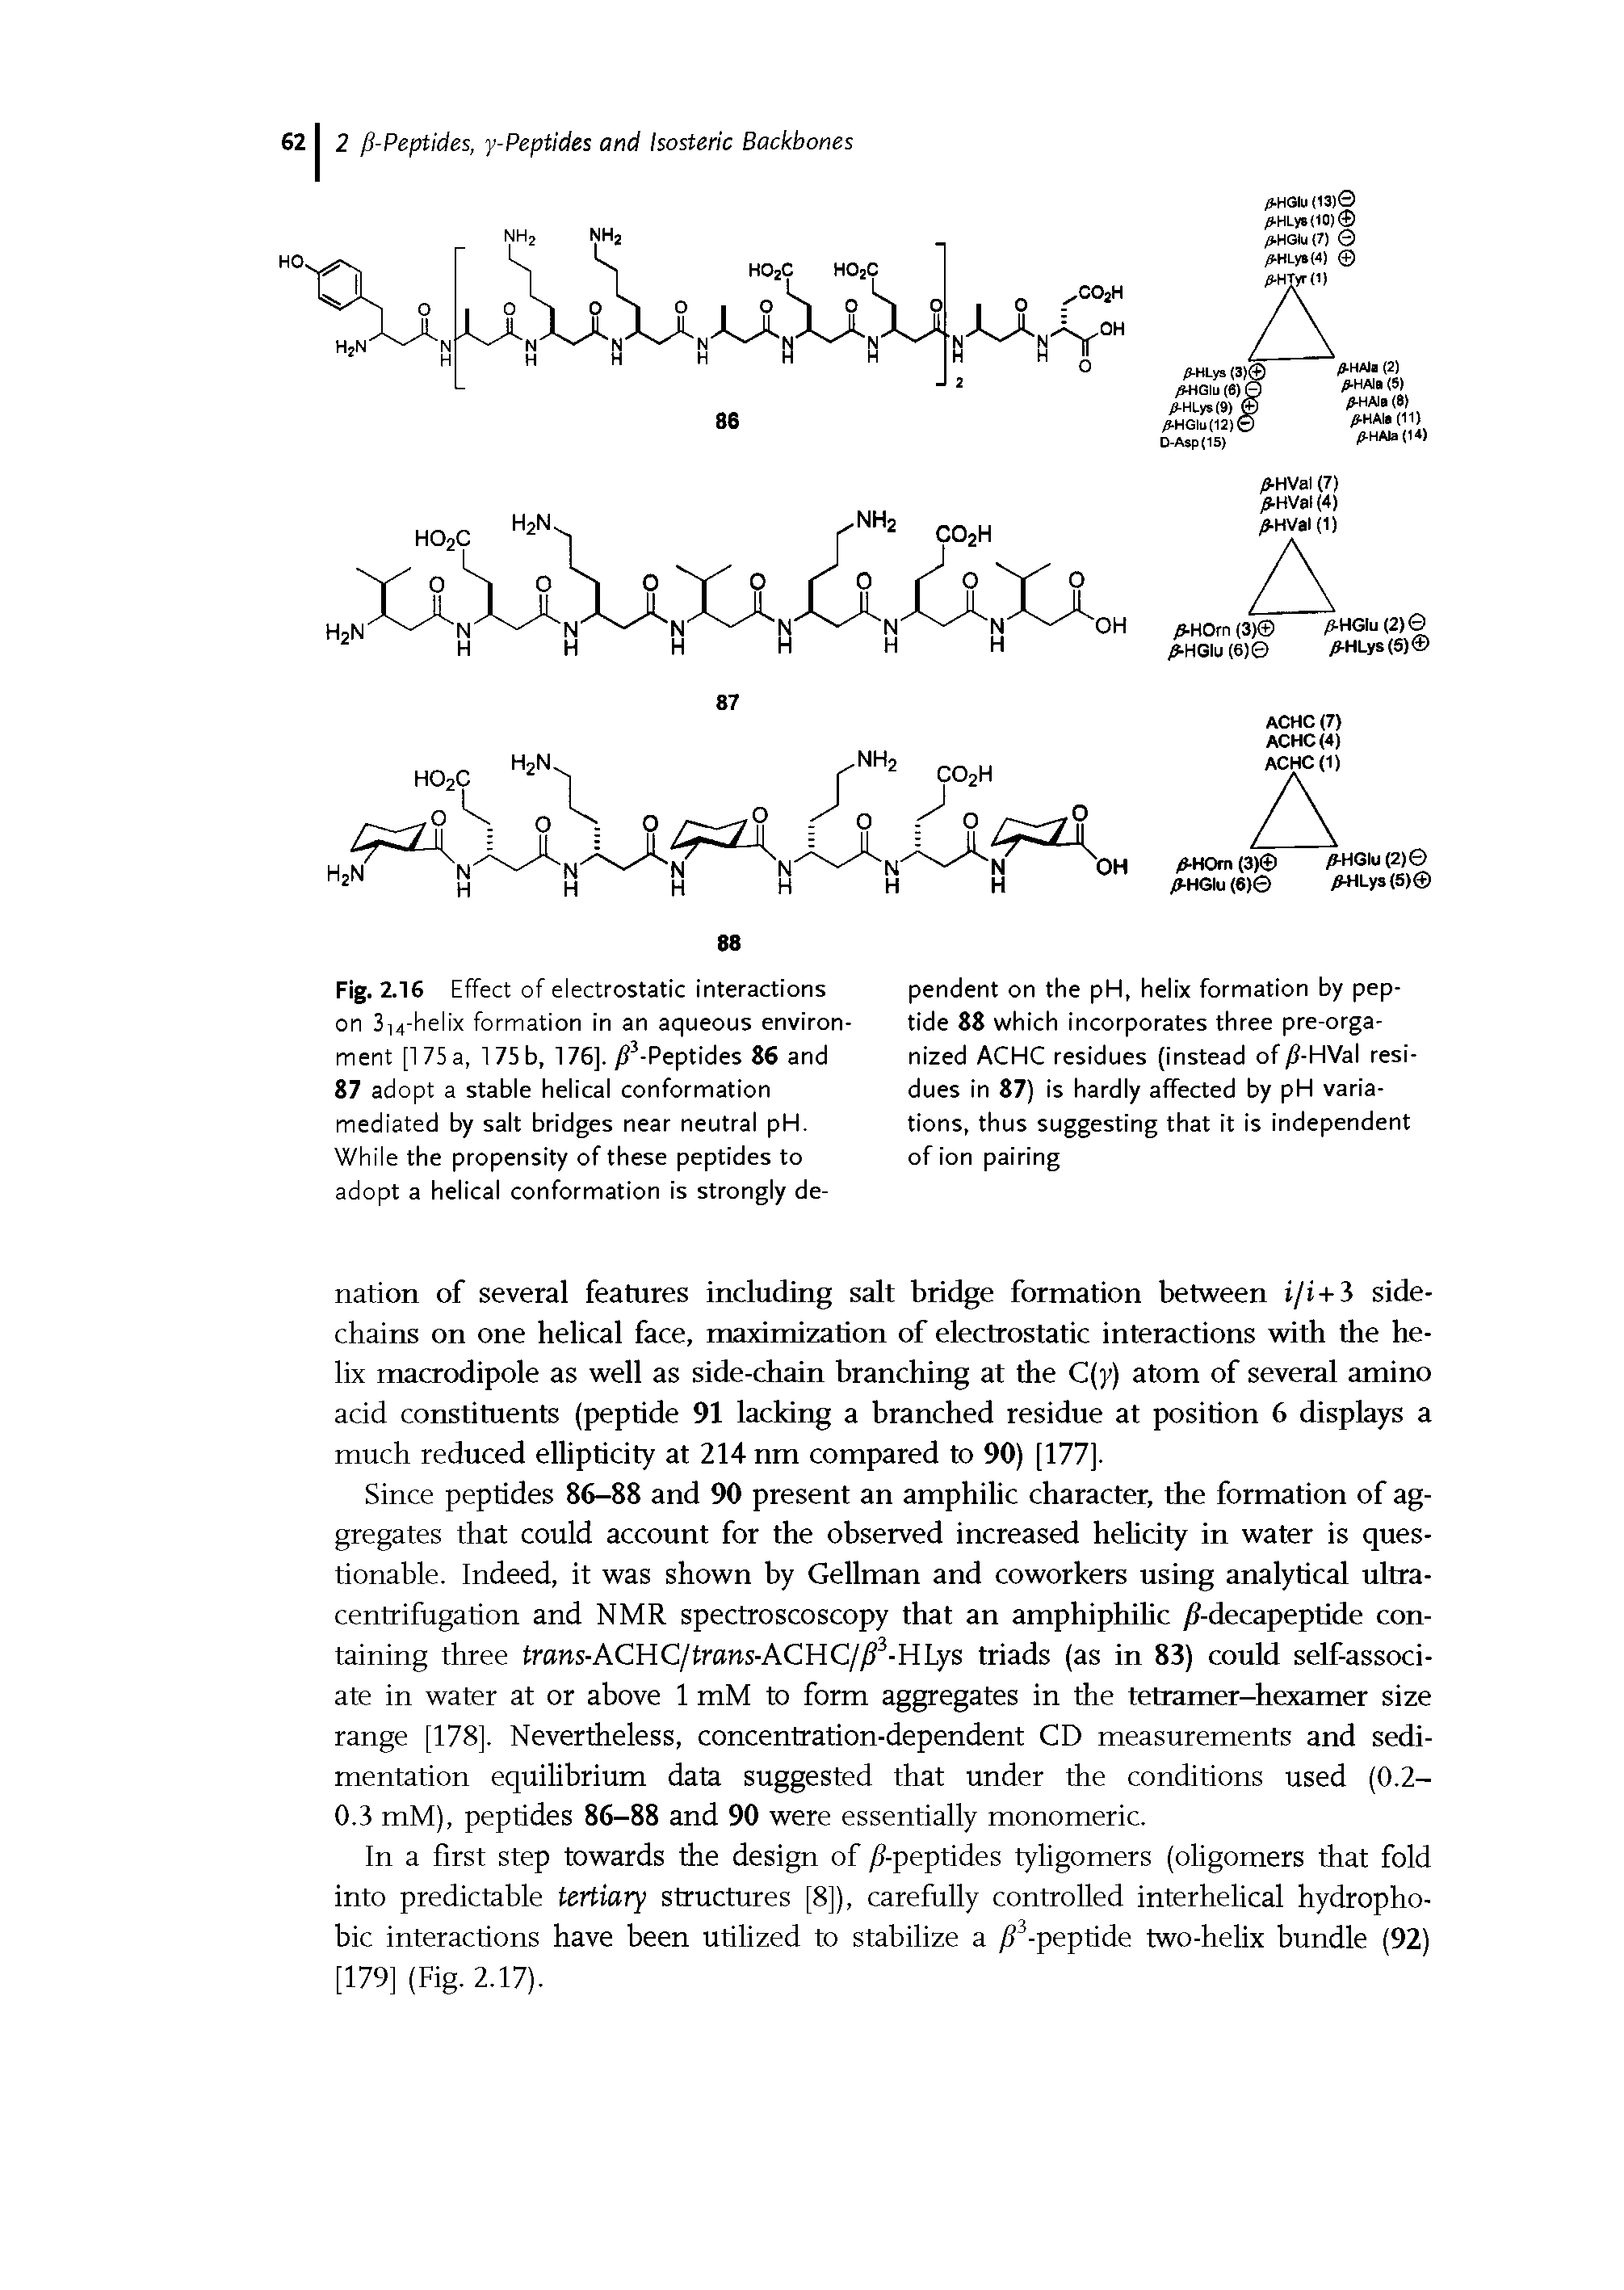 Fig. 2.16 Effect of electrostatic interactions on 3i4-helix formation in an aqueous environment [1 75 a, 175 b, 176]. y -Peptides 86 and 87 adopt a stable helical conformation mediated by salt bridges near neutral pH. While the propensity of these peptides to adopt a helical conformation is strongly de-...